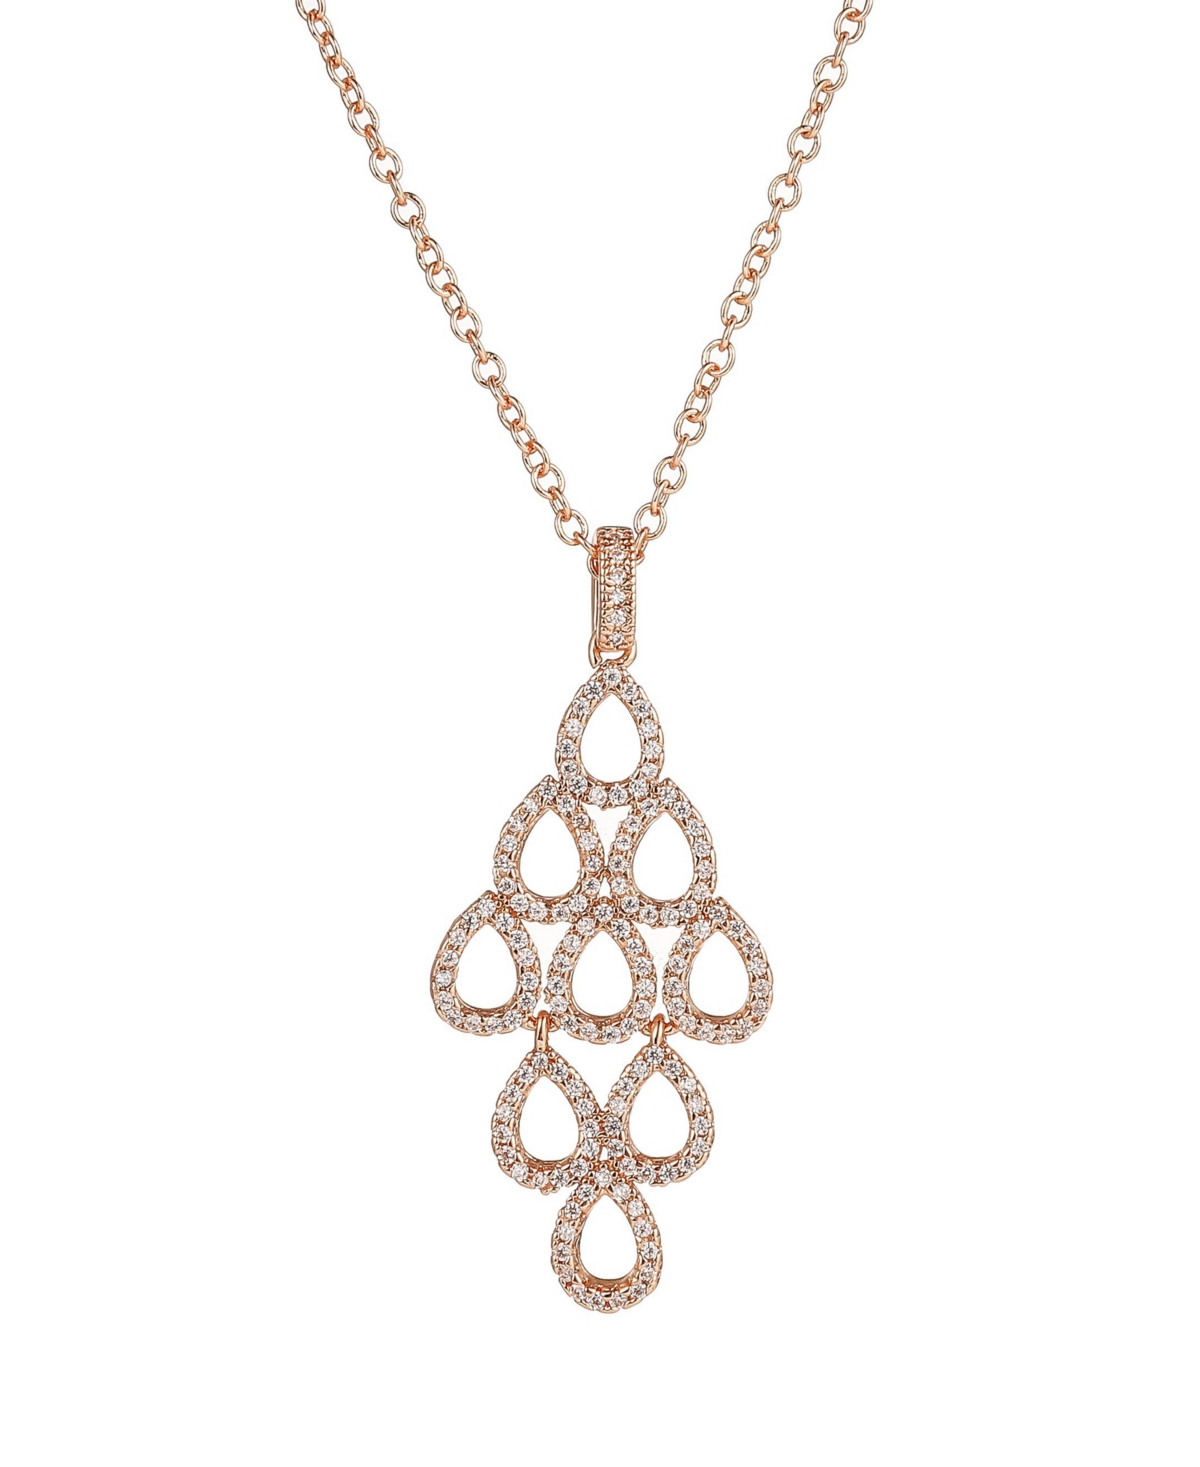 Rose Tone Layered Chandelier Pendant Necklace - Rose